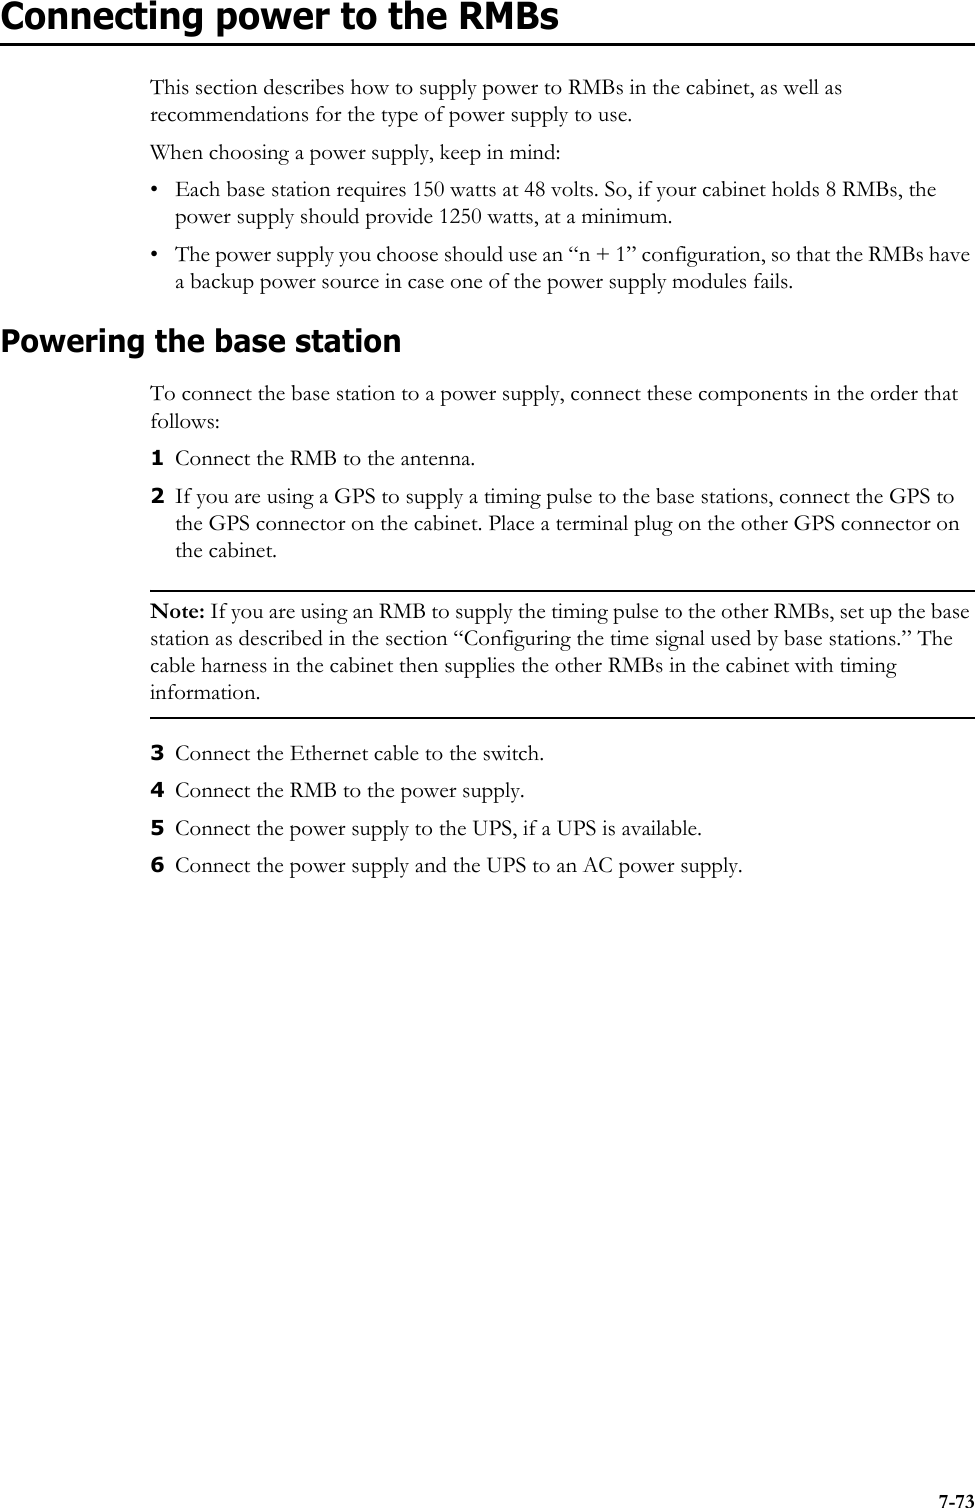 7-73Connecting power to the RMBsThis section describes how to supply power to RMBs in the cabinet, as well as recommendations for the type of power supply to use.When choosing a power supply, keep in mind:• Each base station requires 150 watts at 48 volts. So, if your cabinet holds 8 RMBs, the power supply should provide 1250 watts, at a minimum.• The power supply you choose should use an “n + 1” configuration, so that the RMBs have a backup power source in case one of the power supply modules fails. Powering the base stationTo connect the base station to a power supply, connect these components in the order that follows: 1Connect the RMB to the antenna.2If you are using a GPS to supply a timing pulse to the base stations, connect the GPS to the GPS connector on the cabinet. Place a terminal plug on the other GPS connector on the cabinet.Note: If you are using an RMB to supply the timing pulse to the other RMBs, set up the base station as described in the section “Configuring the time signal used by base stations.” The cable harness in the cabinet then supplies the other RMBs in the cabinet with timing information. 3Connect the Ethernet cable to the switch.4Connect the RMB to the power supply.5Connect the power supply to the UPS, if a UPS is available.6Connect the power supply and the UPS to an AC power supply.